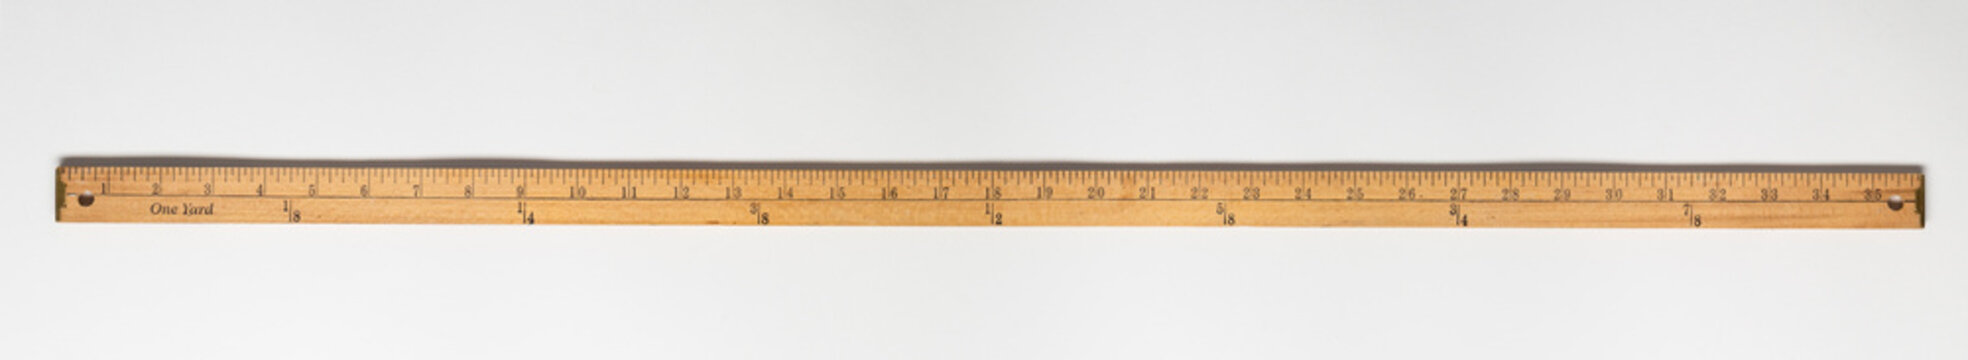 Wooden yardstick on white backgrounds whit inches and yard fractions scales.